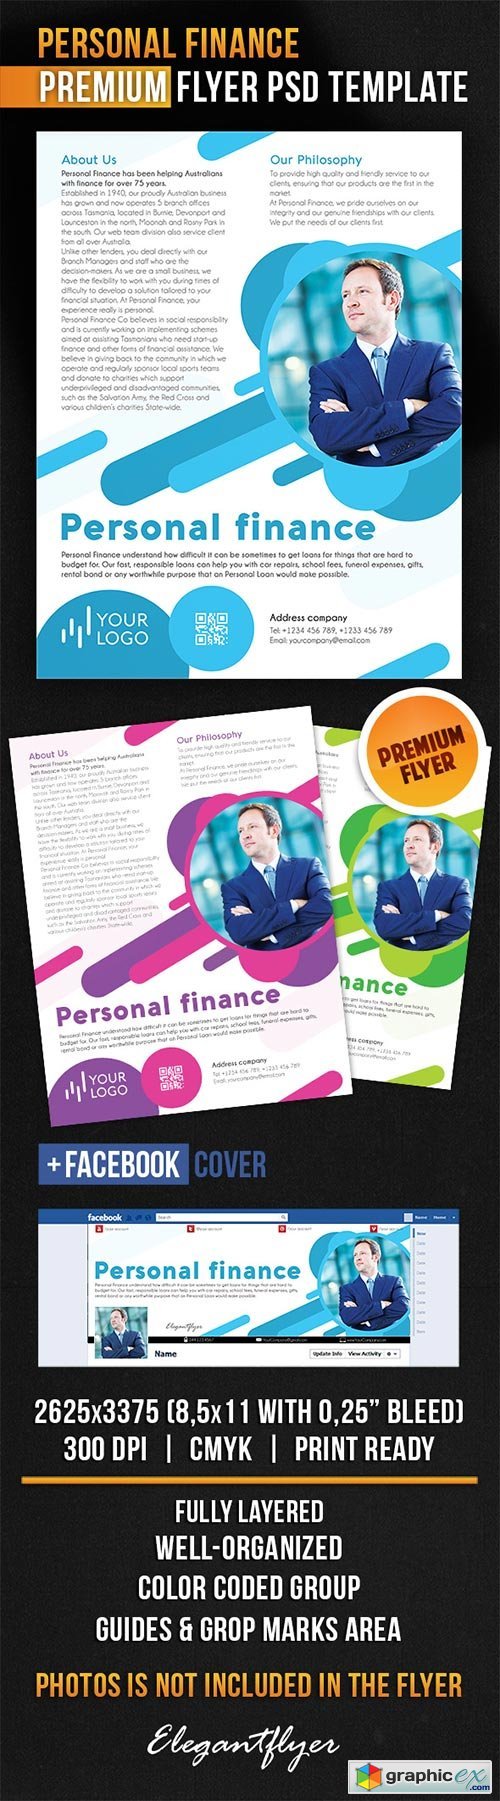 Personal Finance Flyer PSD Template + Facebook Cover